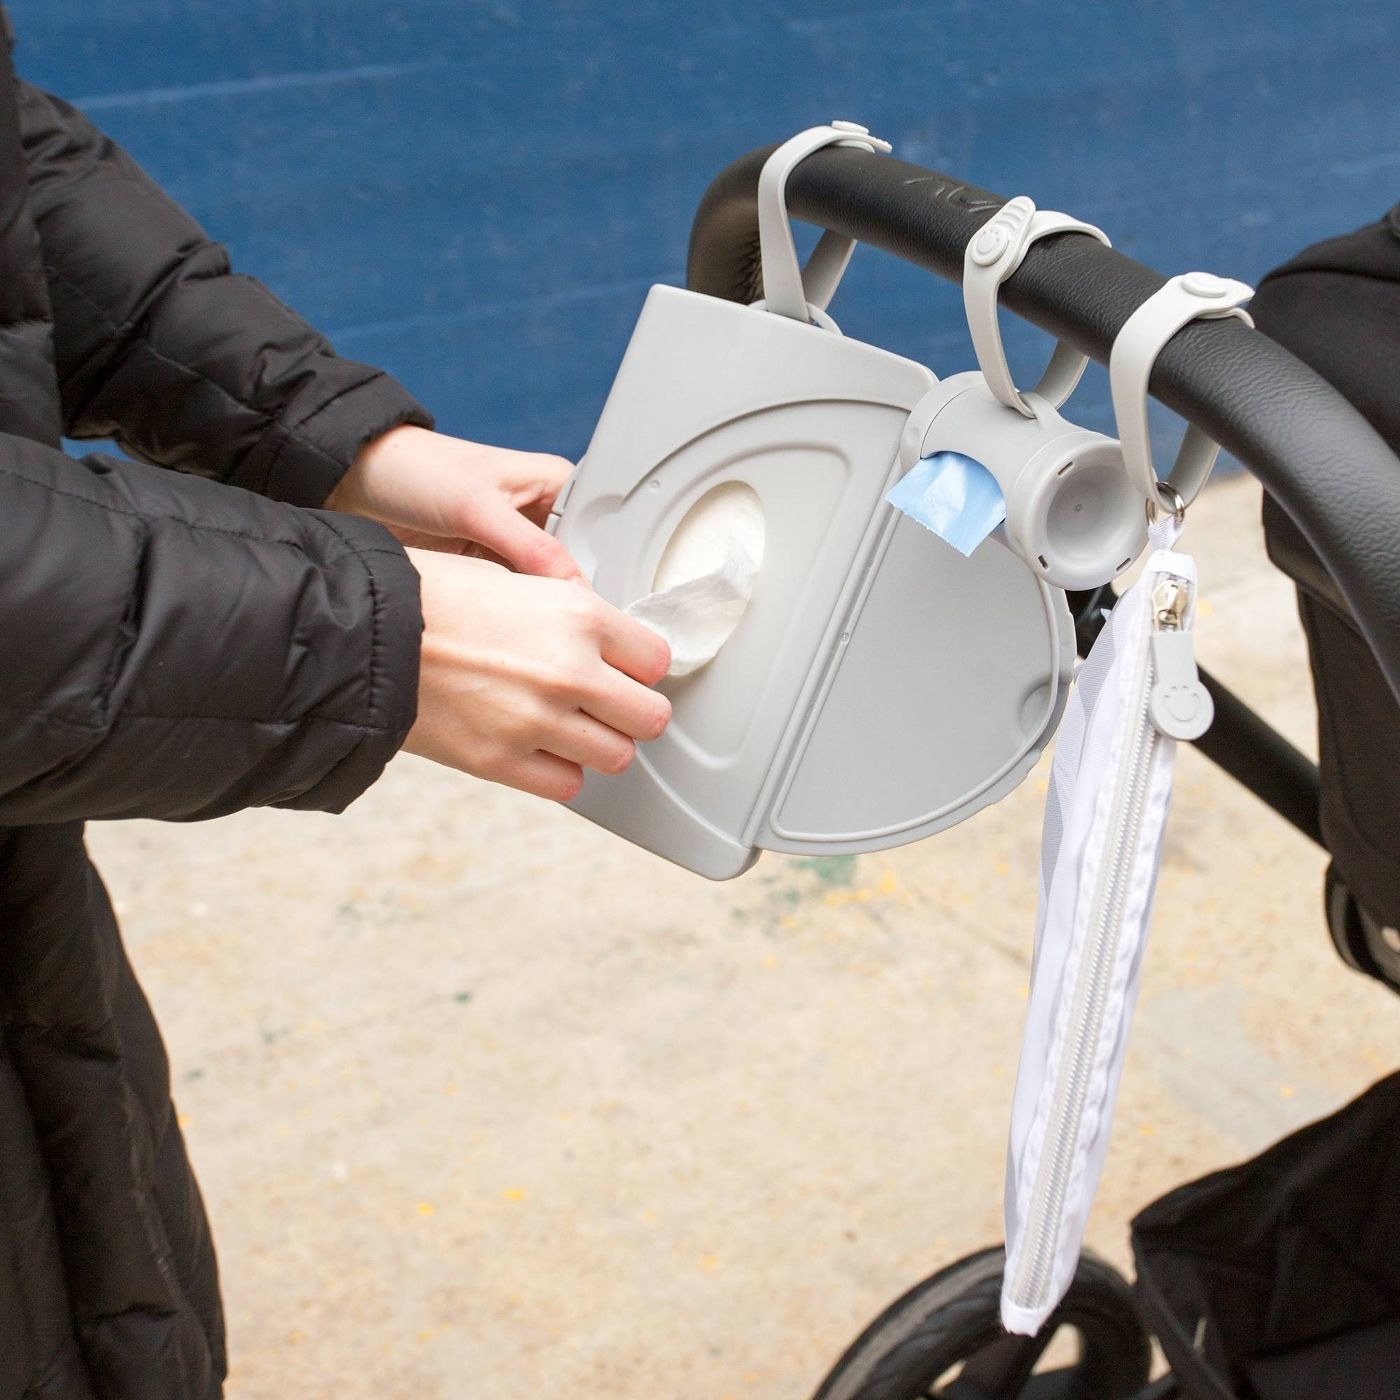 the wipe dispenser attached to a stroller